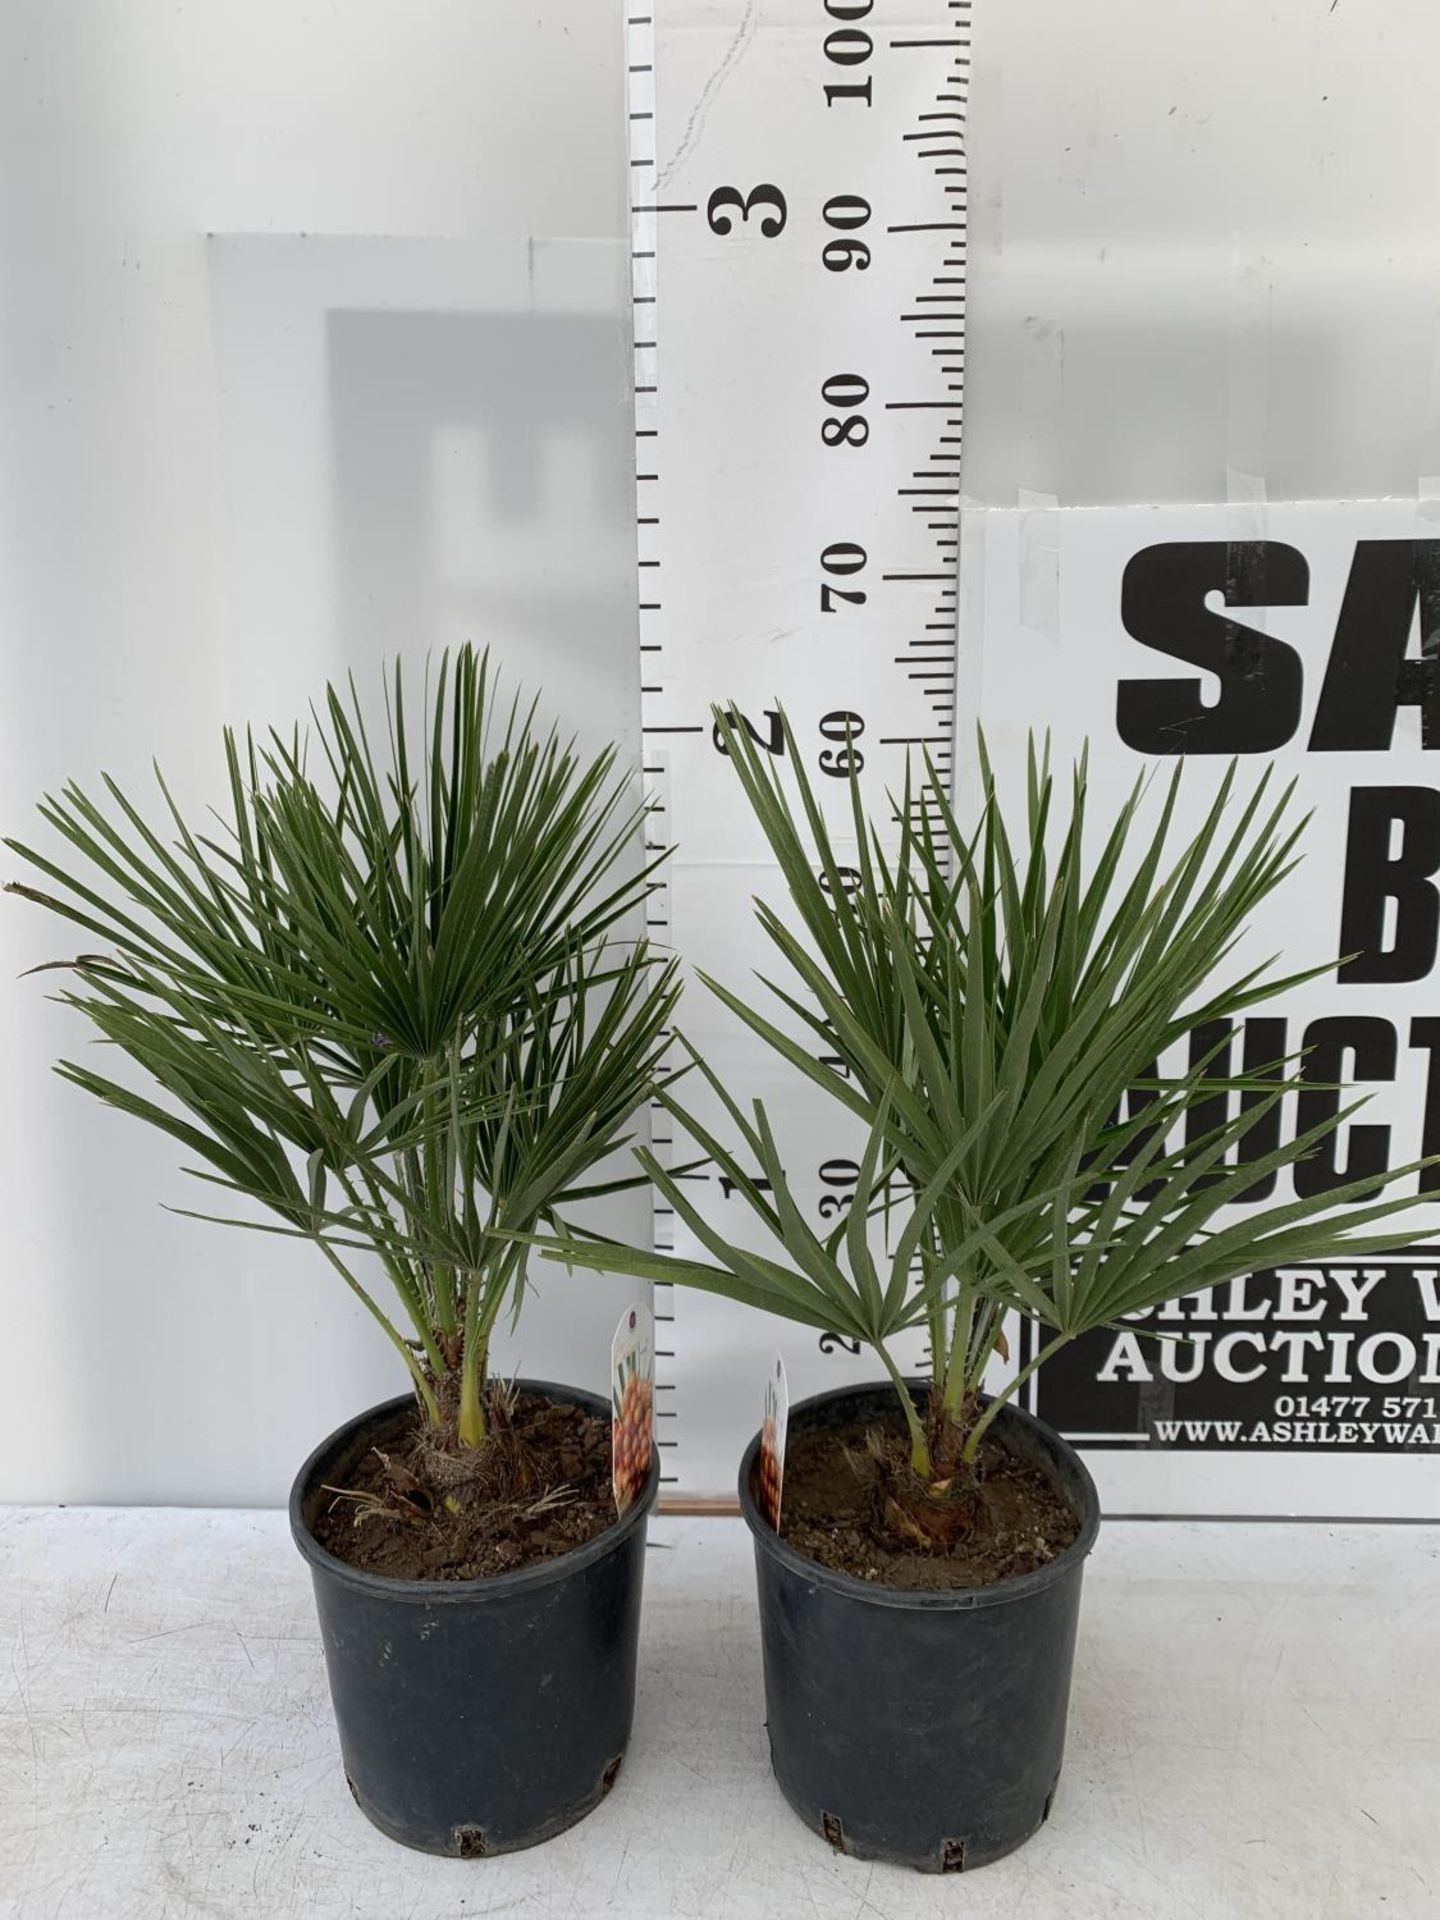 TWO CHAMAEROPS HUMILIS HARDY IN 3 LTR POTS APPROX 60CM IN HEIGHT PLUS VAT TO BE SOLD FOR THE TWO - Bild 2 aus 6